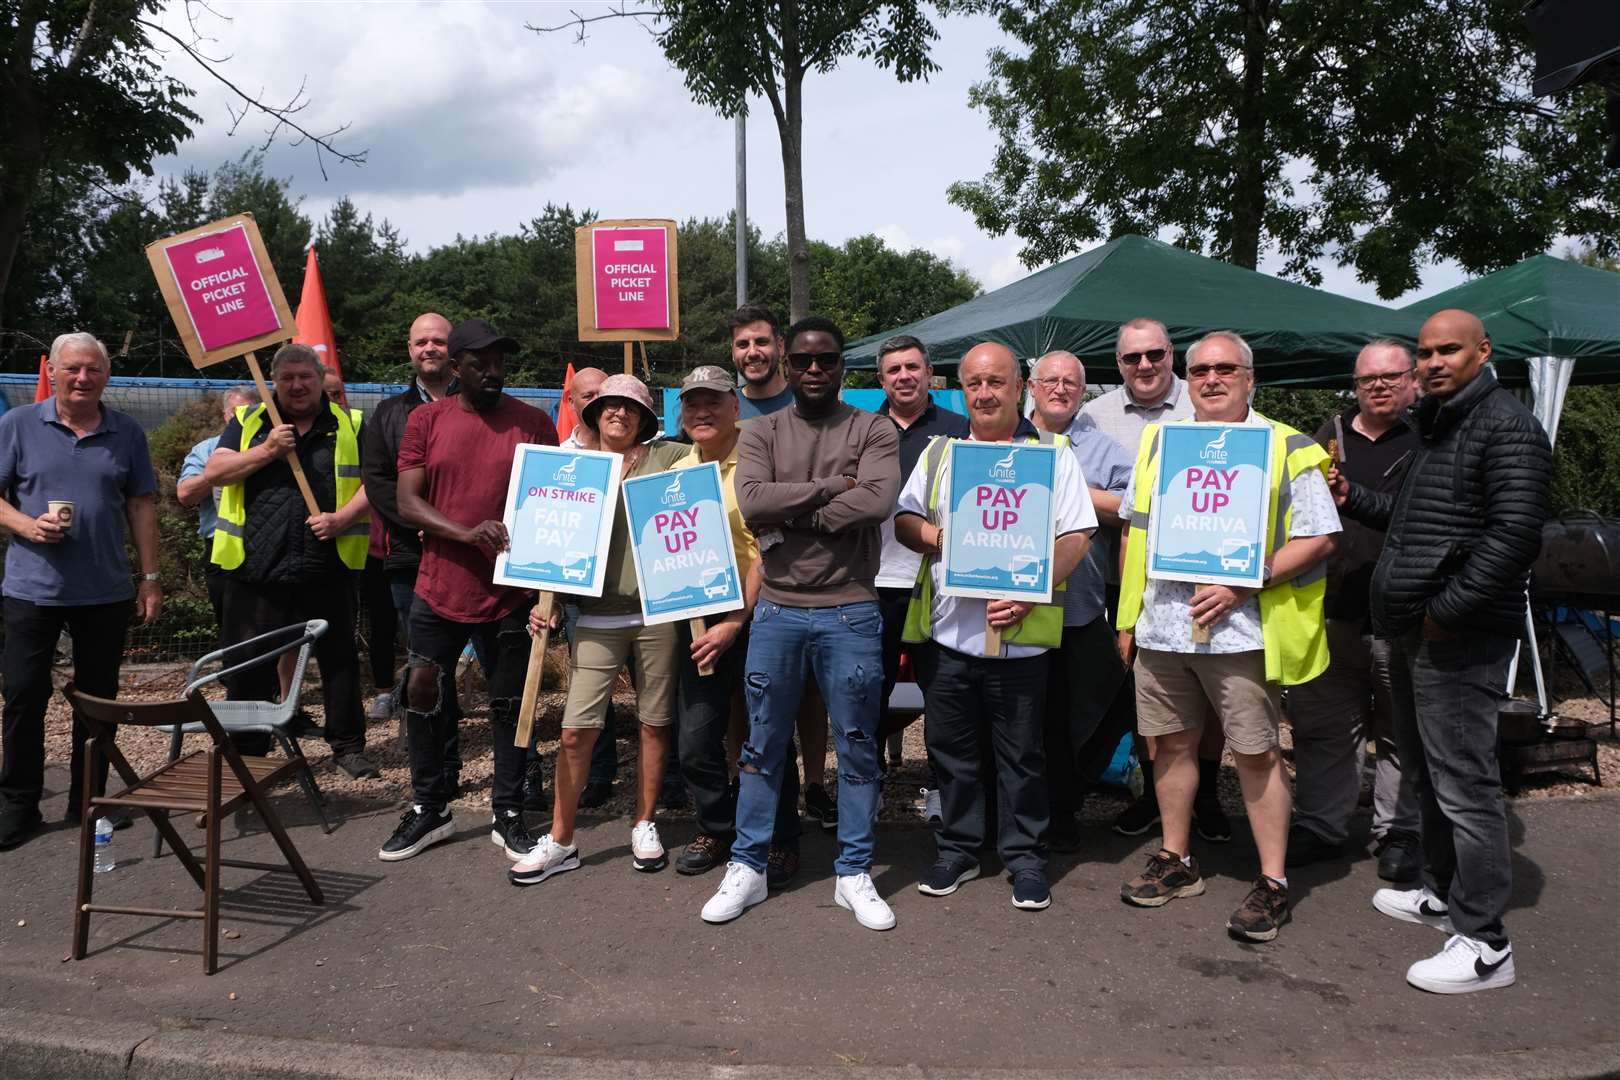 Arriva bus drivers on strike in the North West of the country before a pay offer was agreed